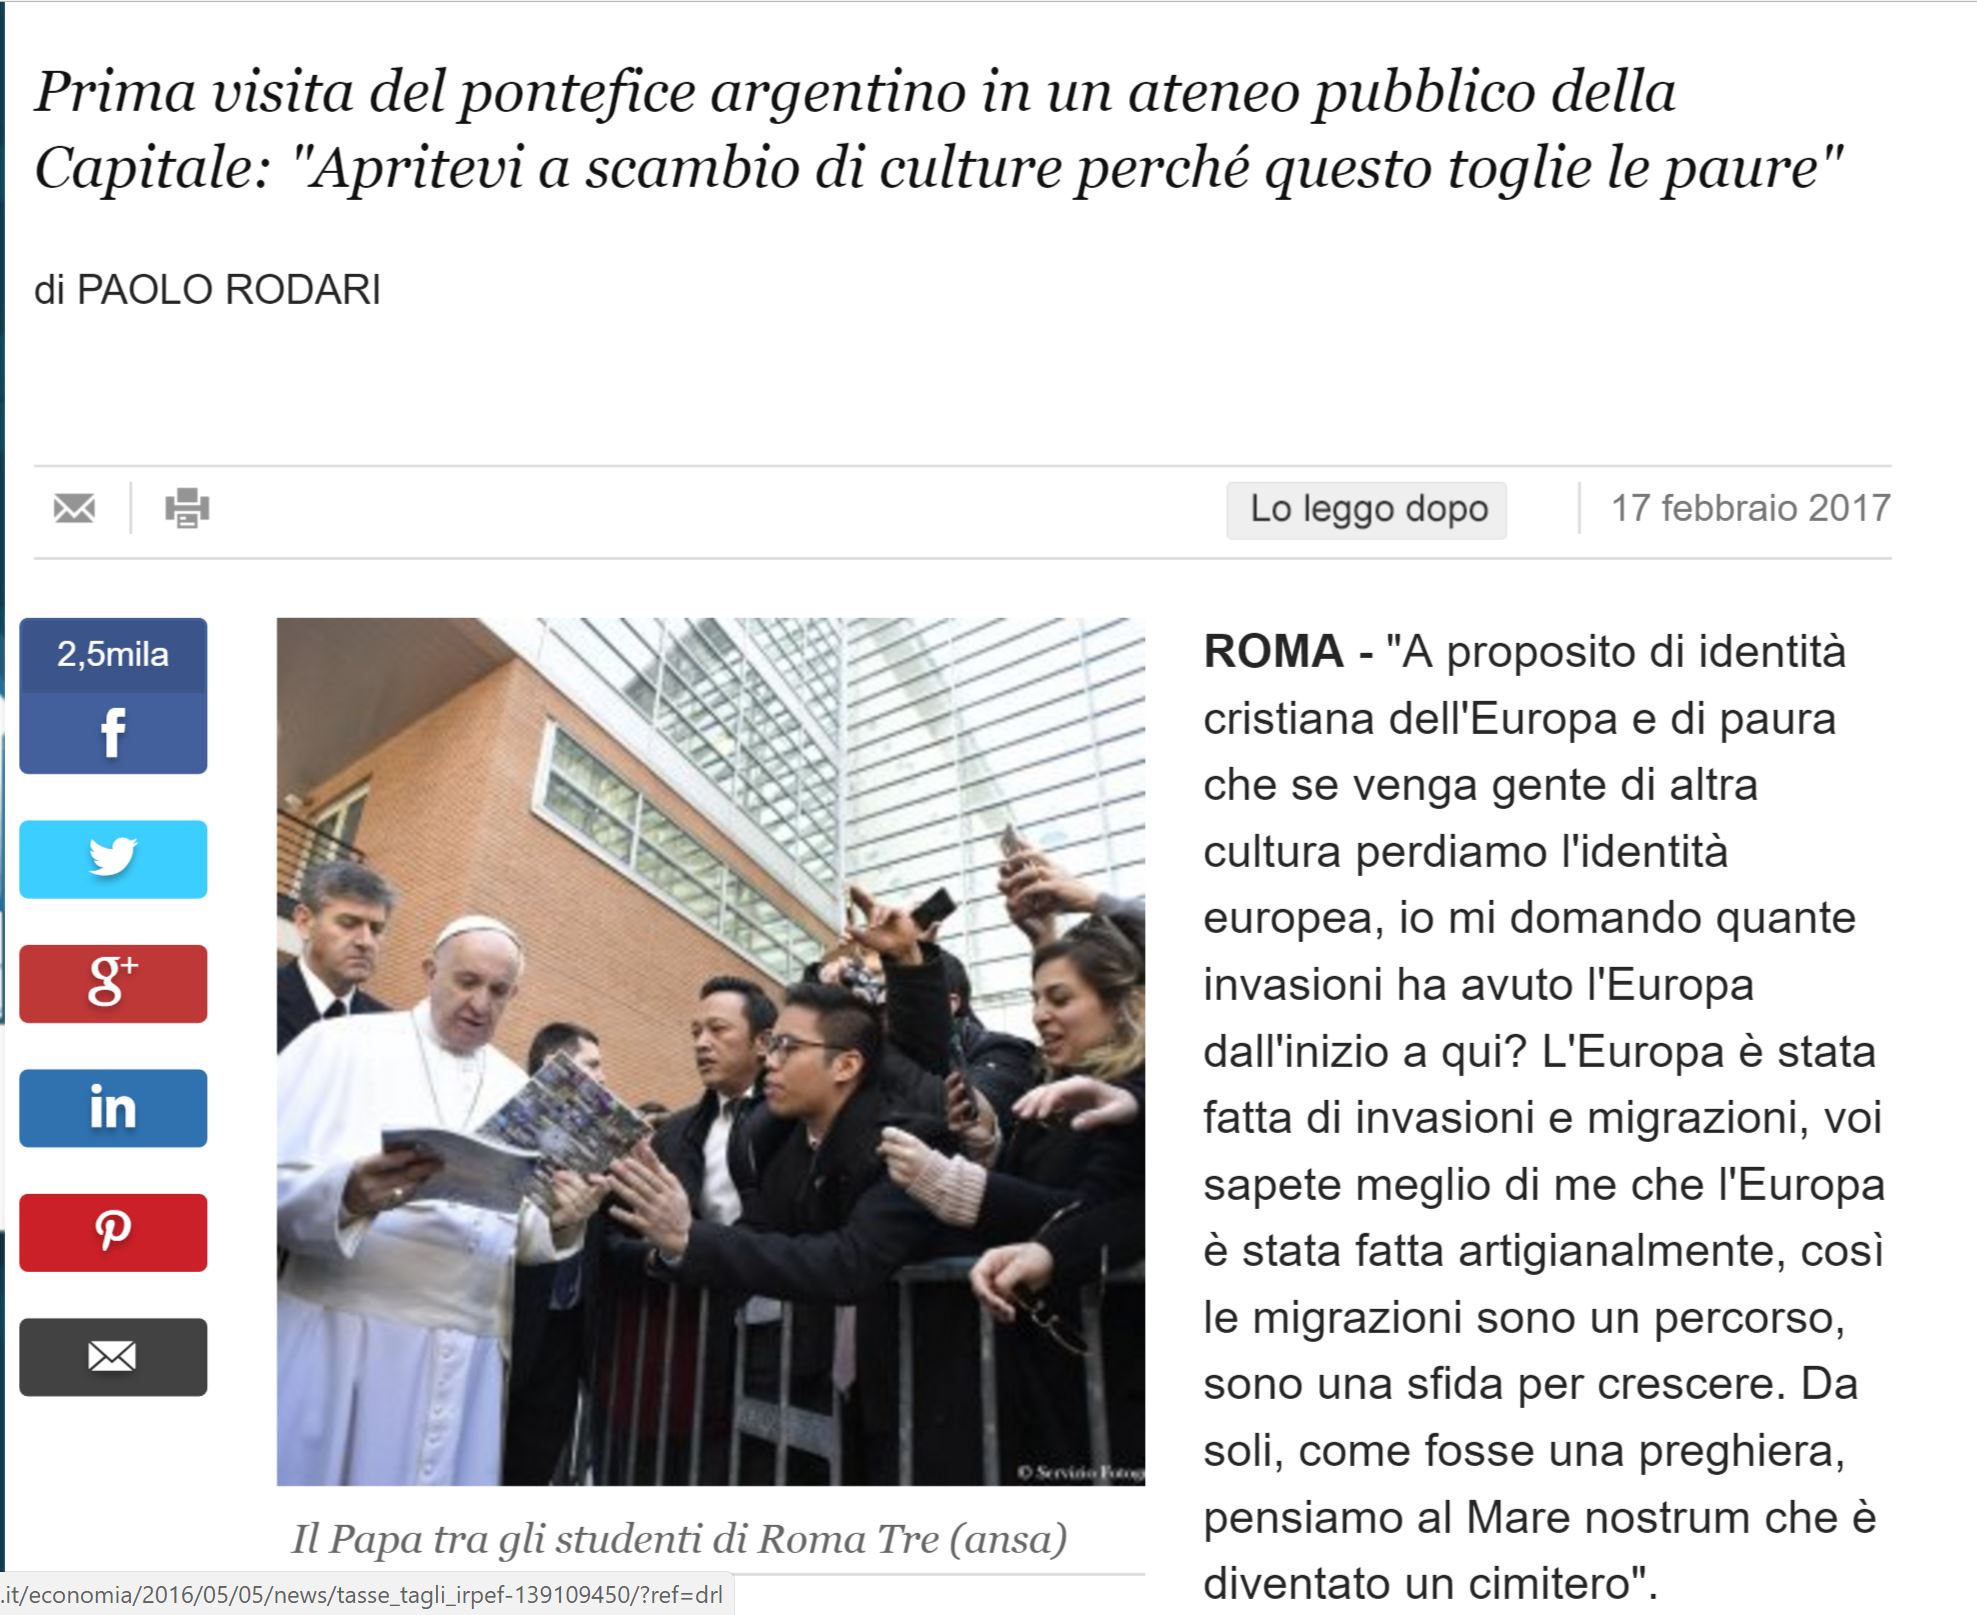 Catholic Missionary Nuns Attend Inc Evangelical Mission In Rome